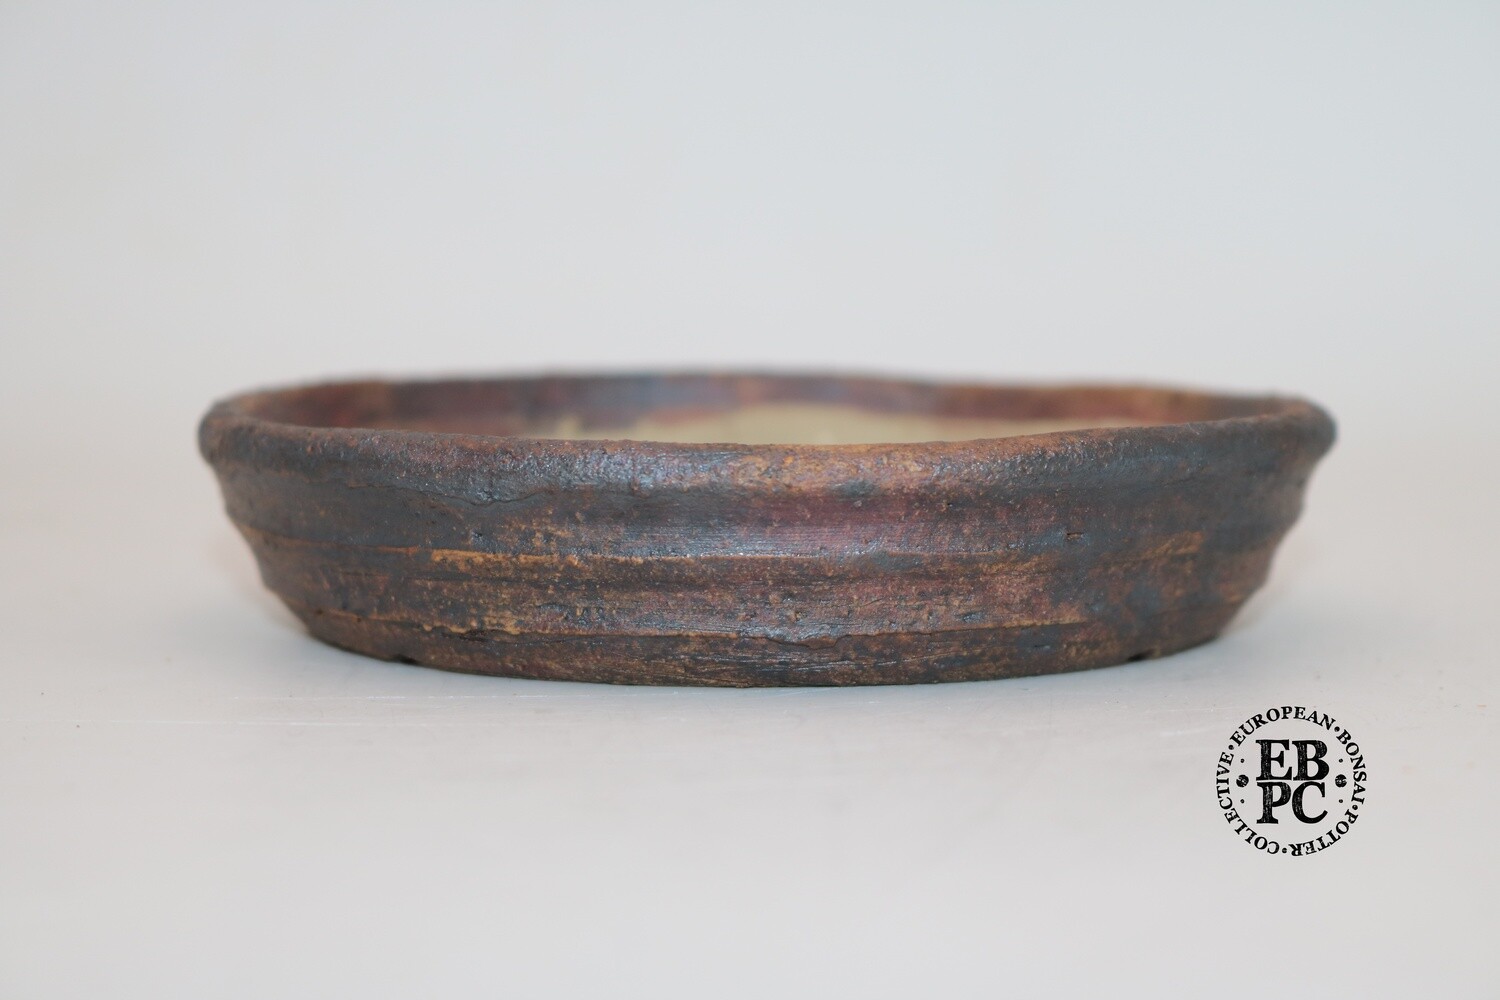 SOLD - Ian Baillie - 13.3cm; Nanban; Round; Rippled banding; Oxide Wash; Browns; Greys; Red tones;